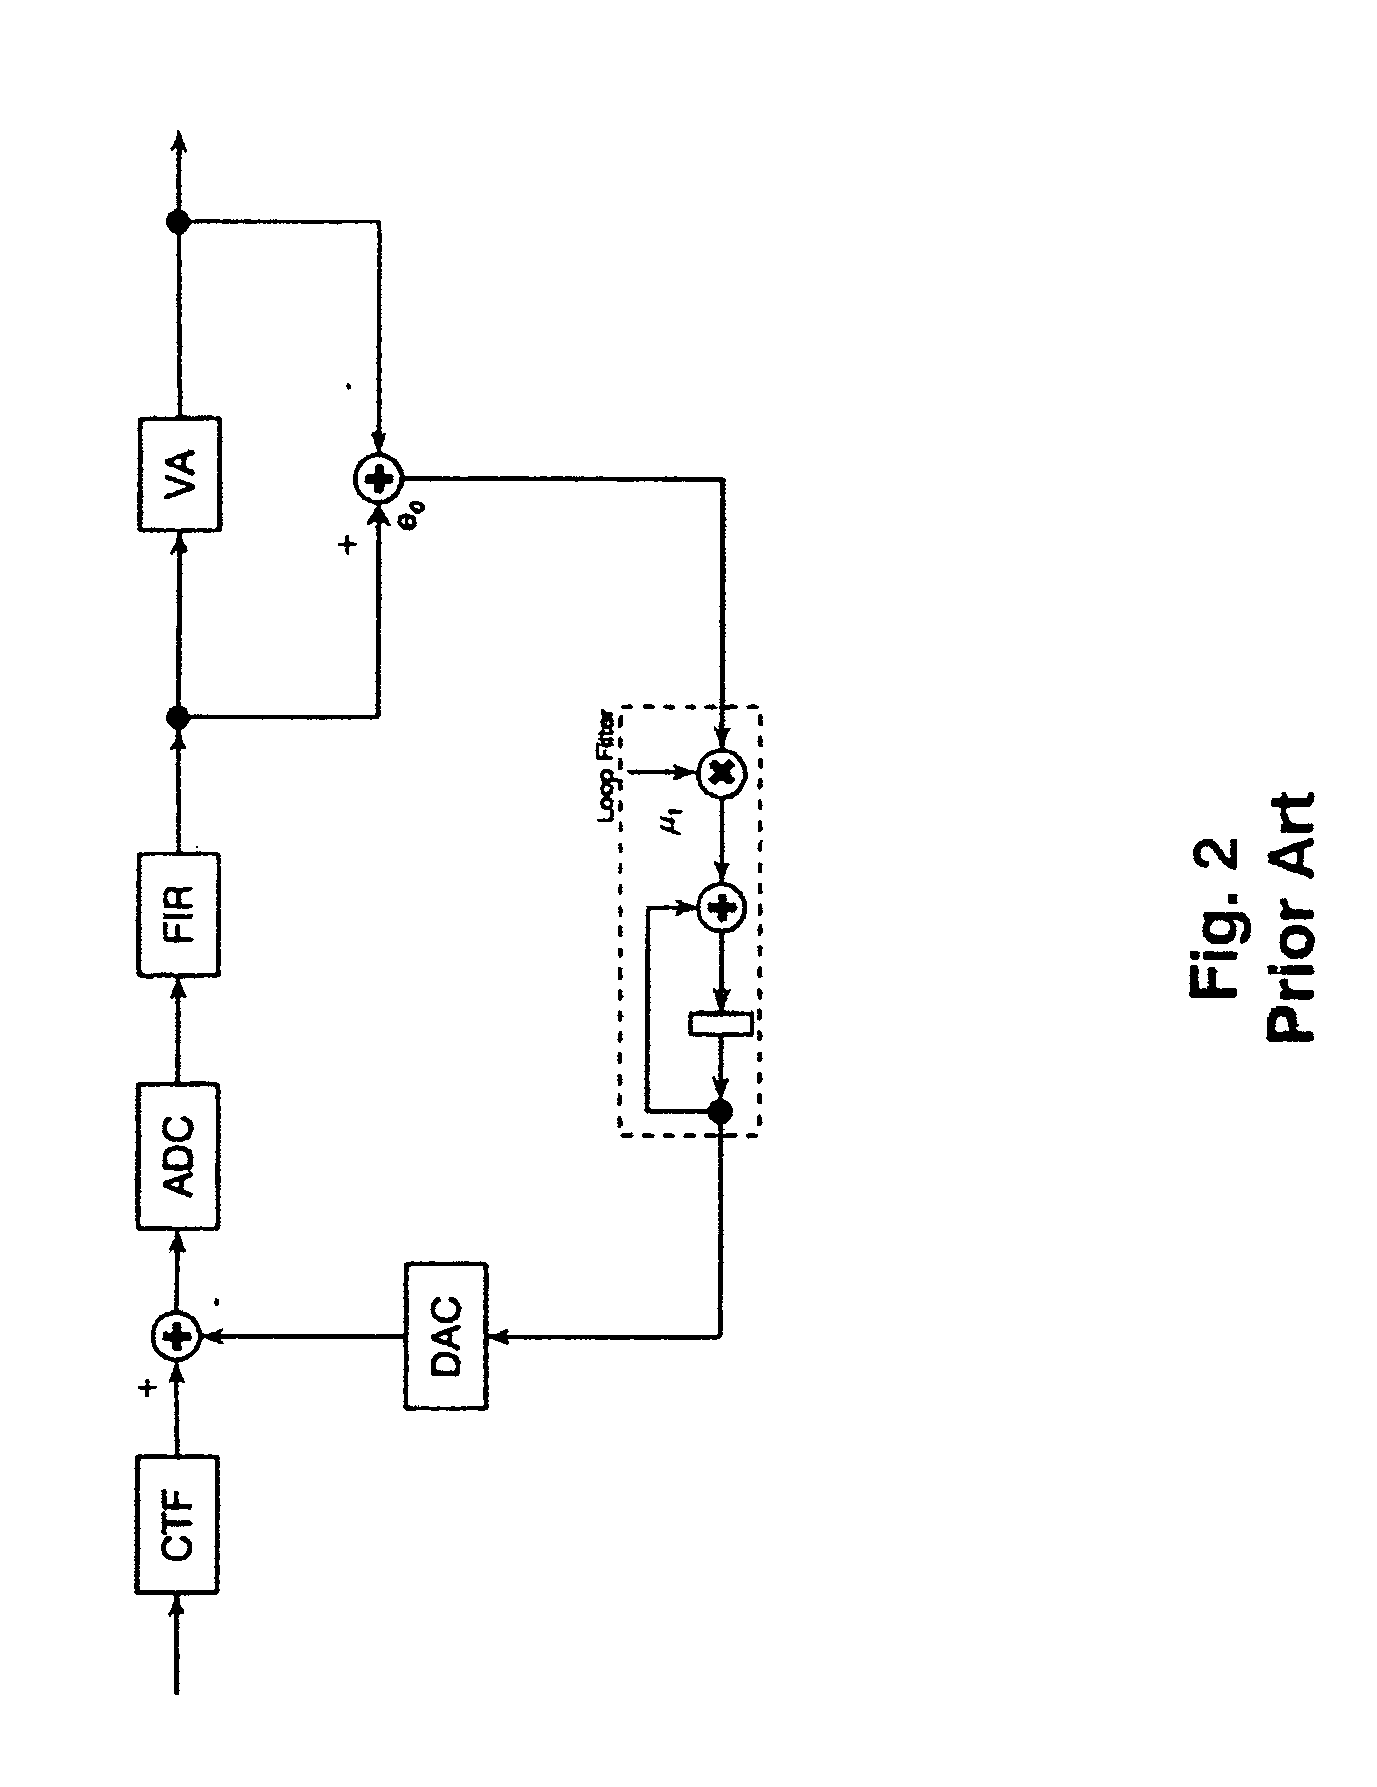 DC-offset compensation loops for magnetic recording system